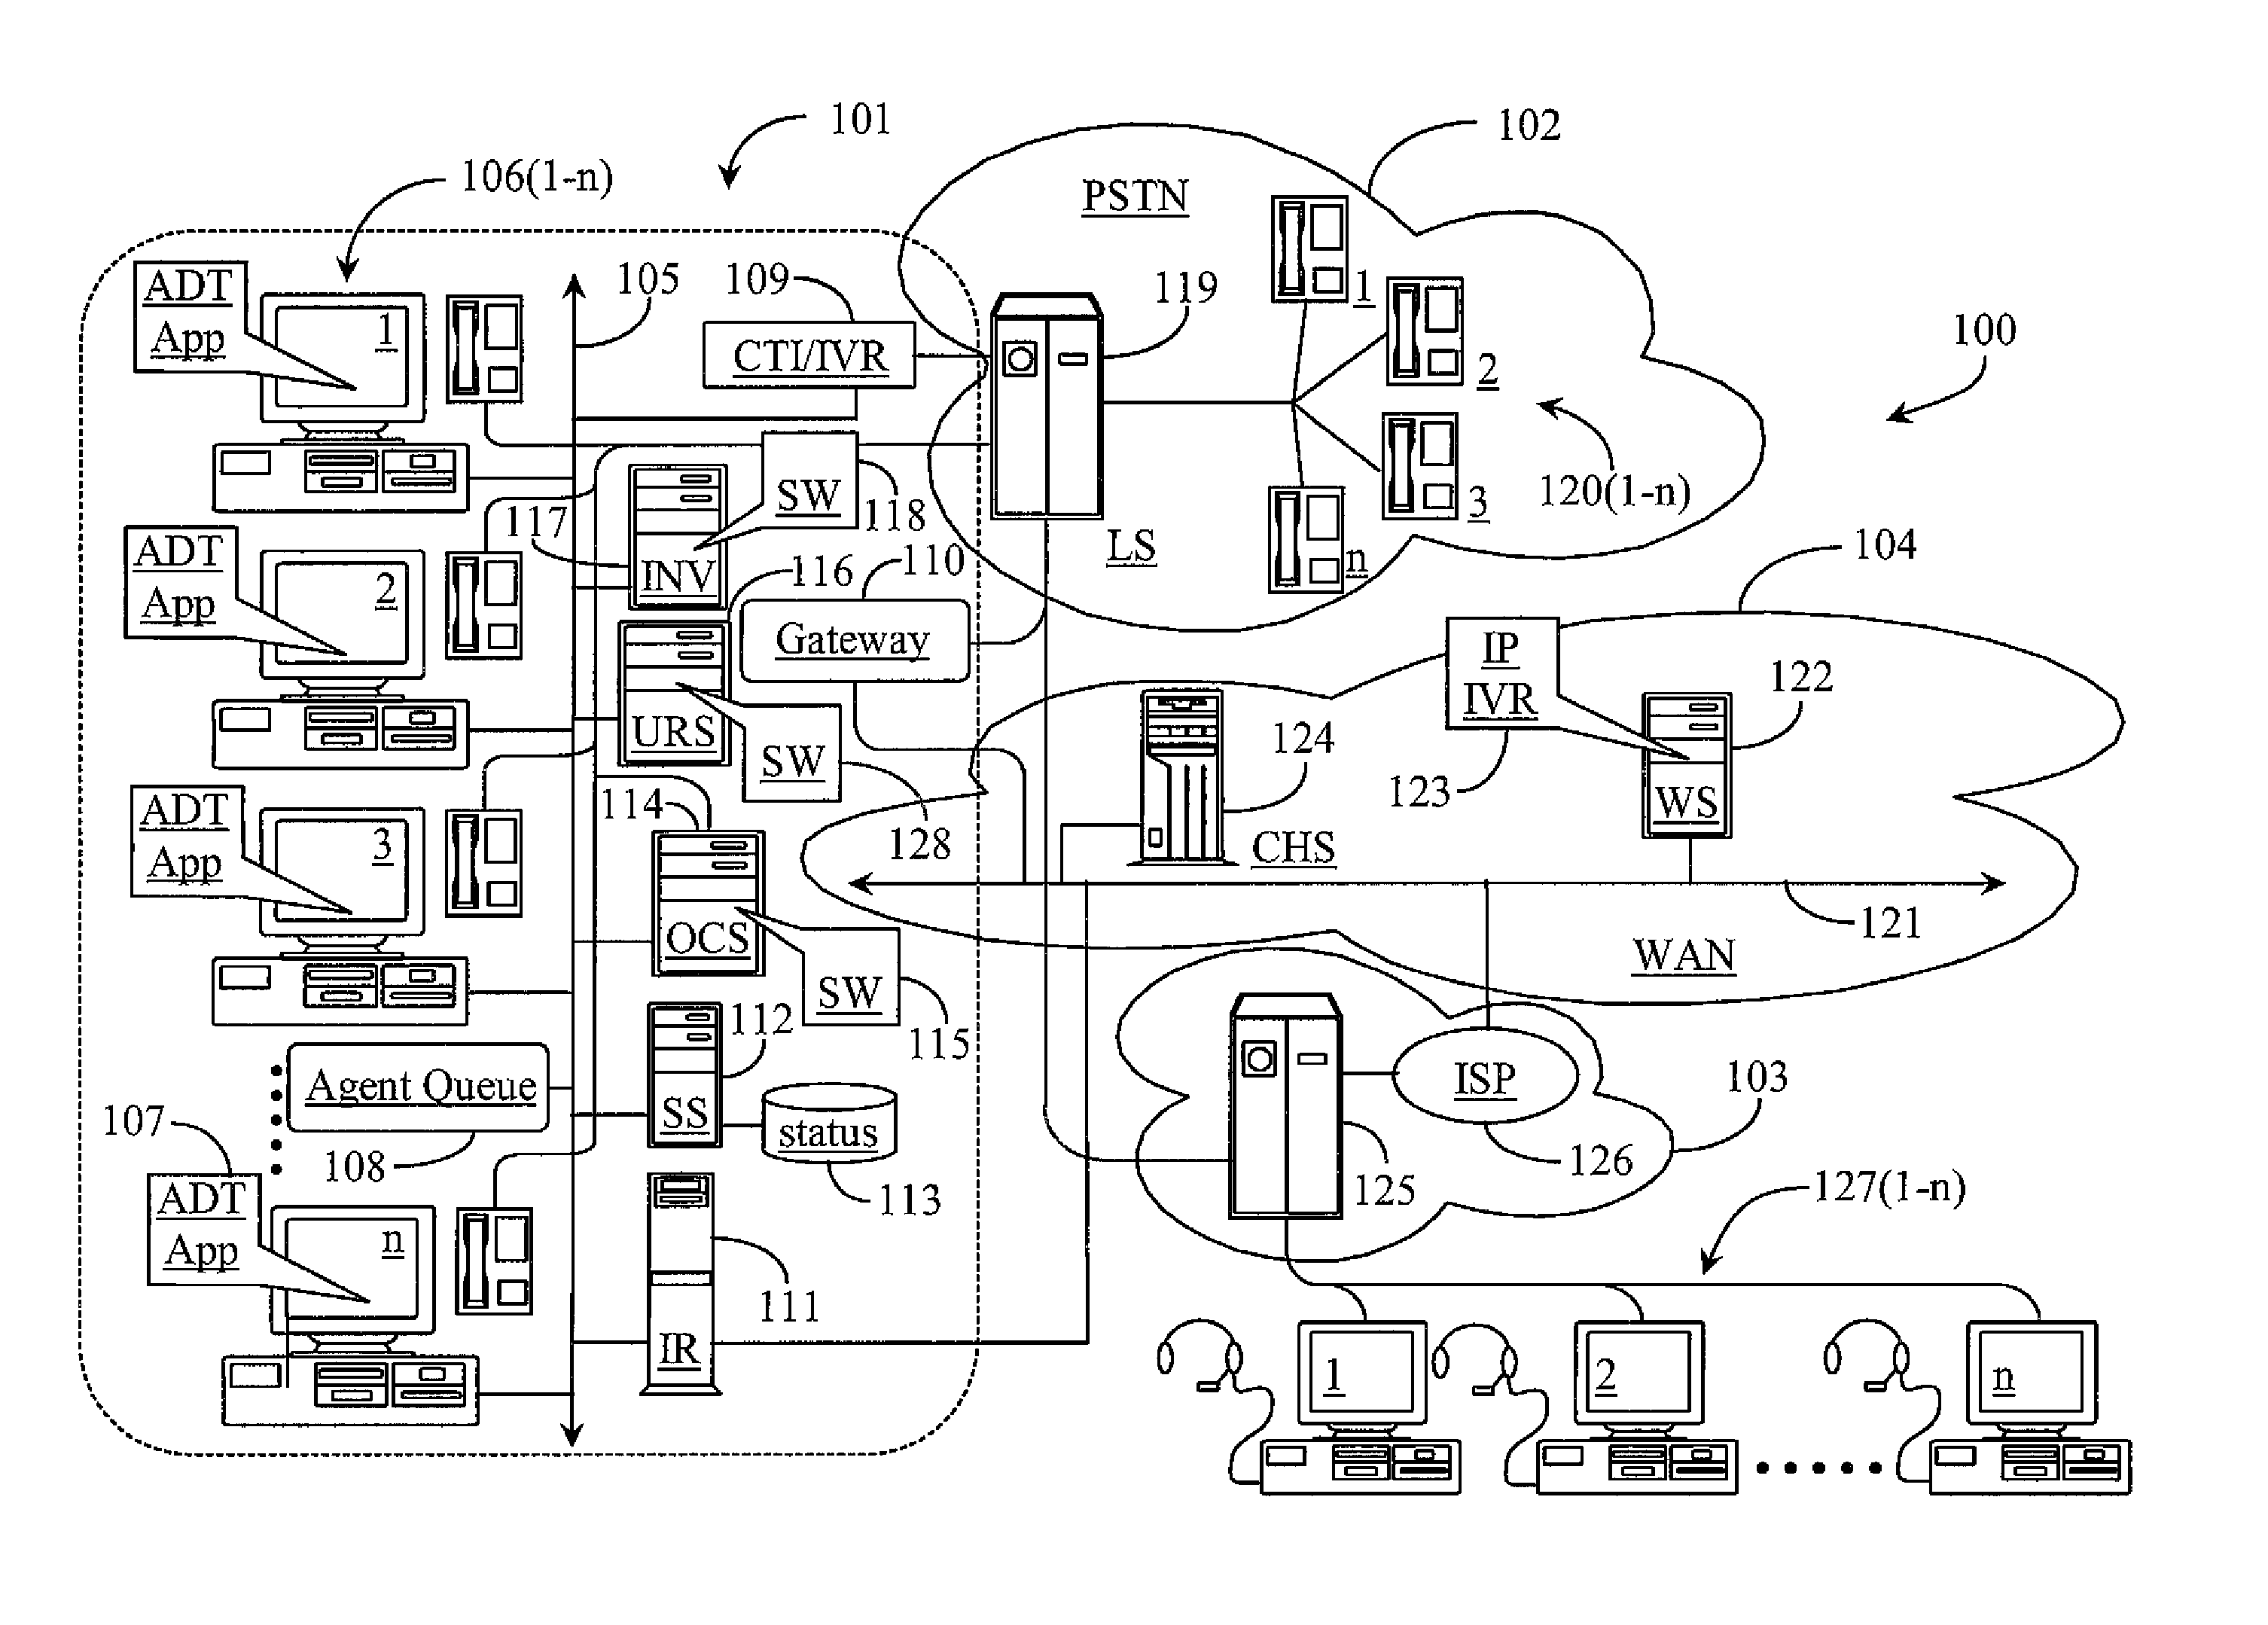 System and methods for predicting future agent readiness for handling an interaction in a call center